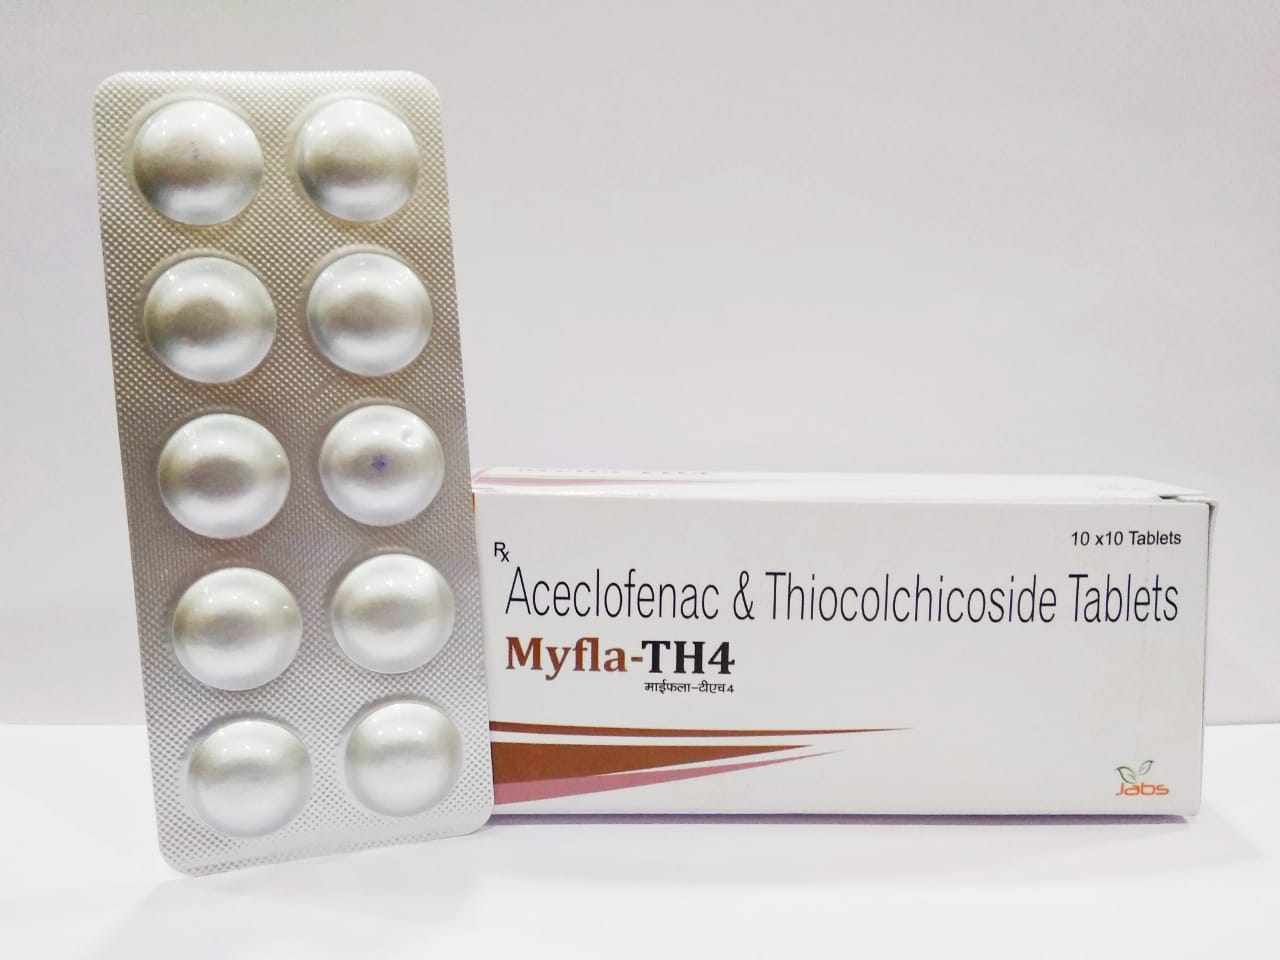 MYFLA-TH4 Tablets